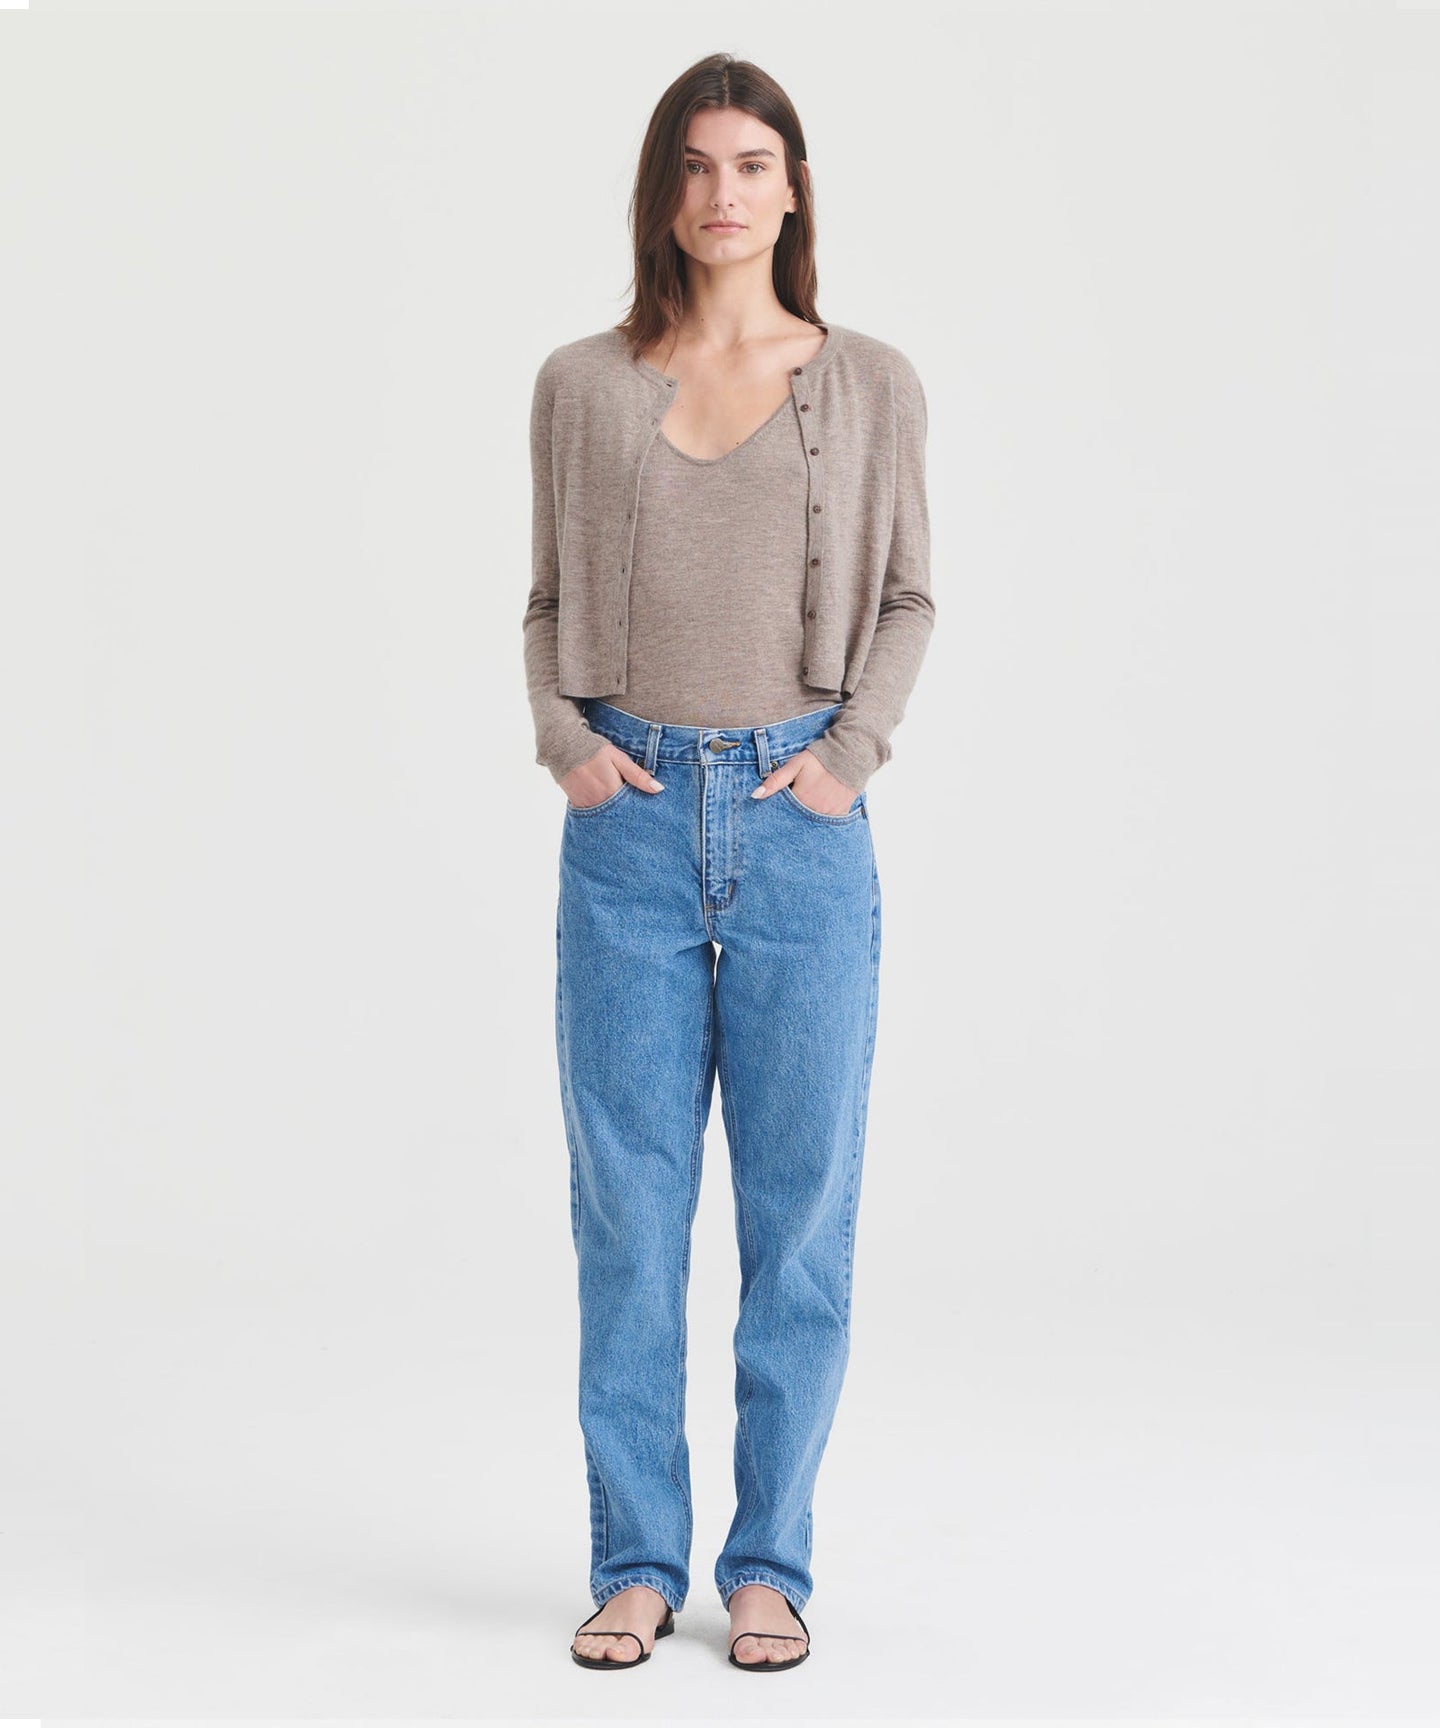 Nadaam Light Cashmere Cropped Cardigan